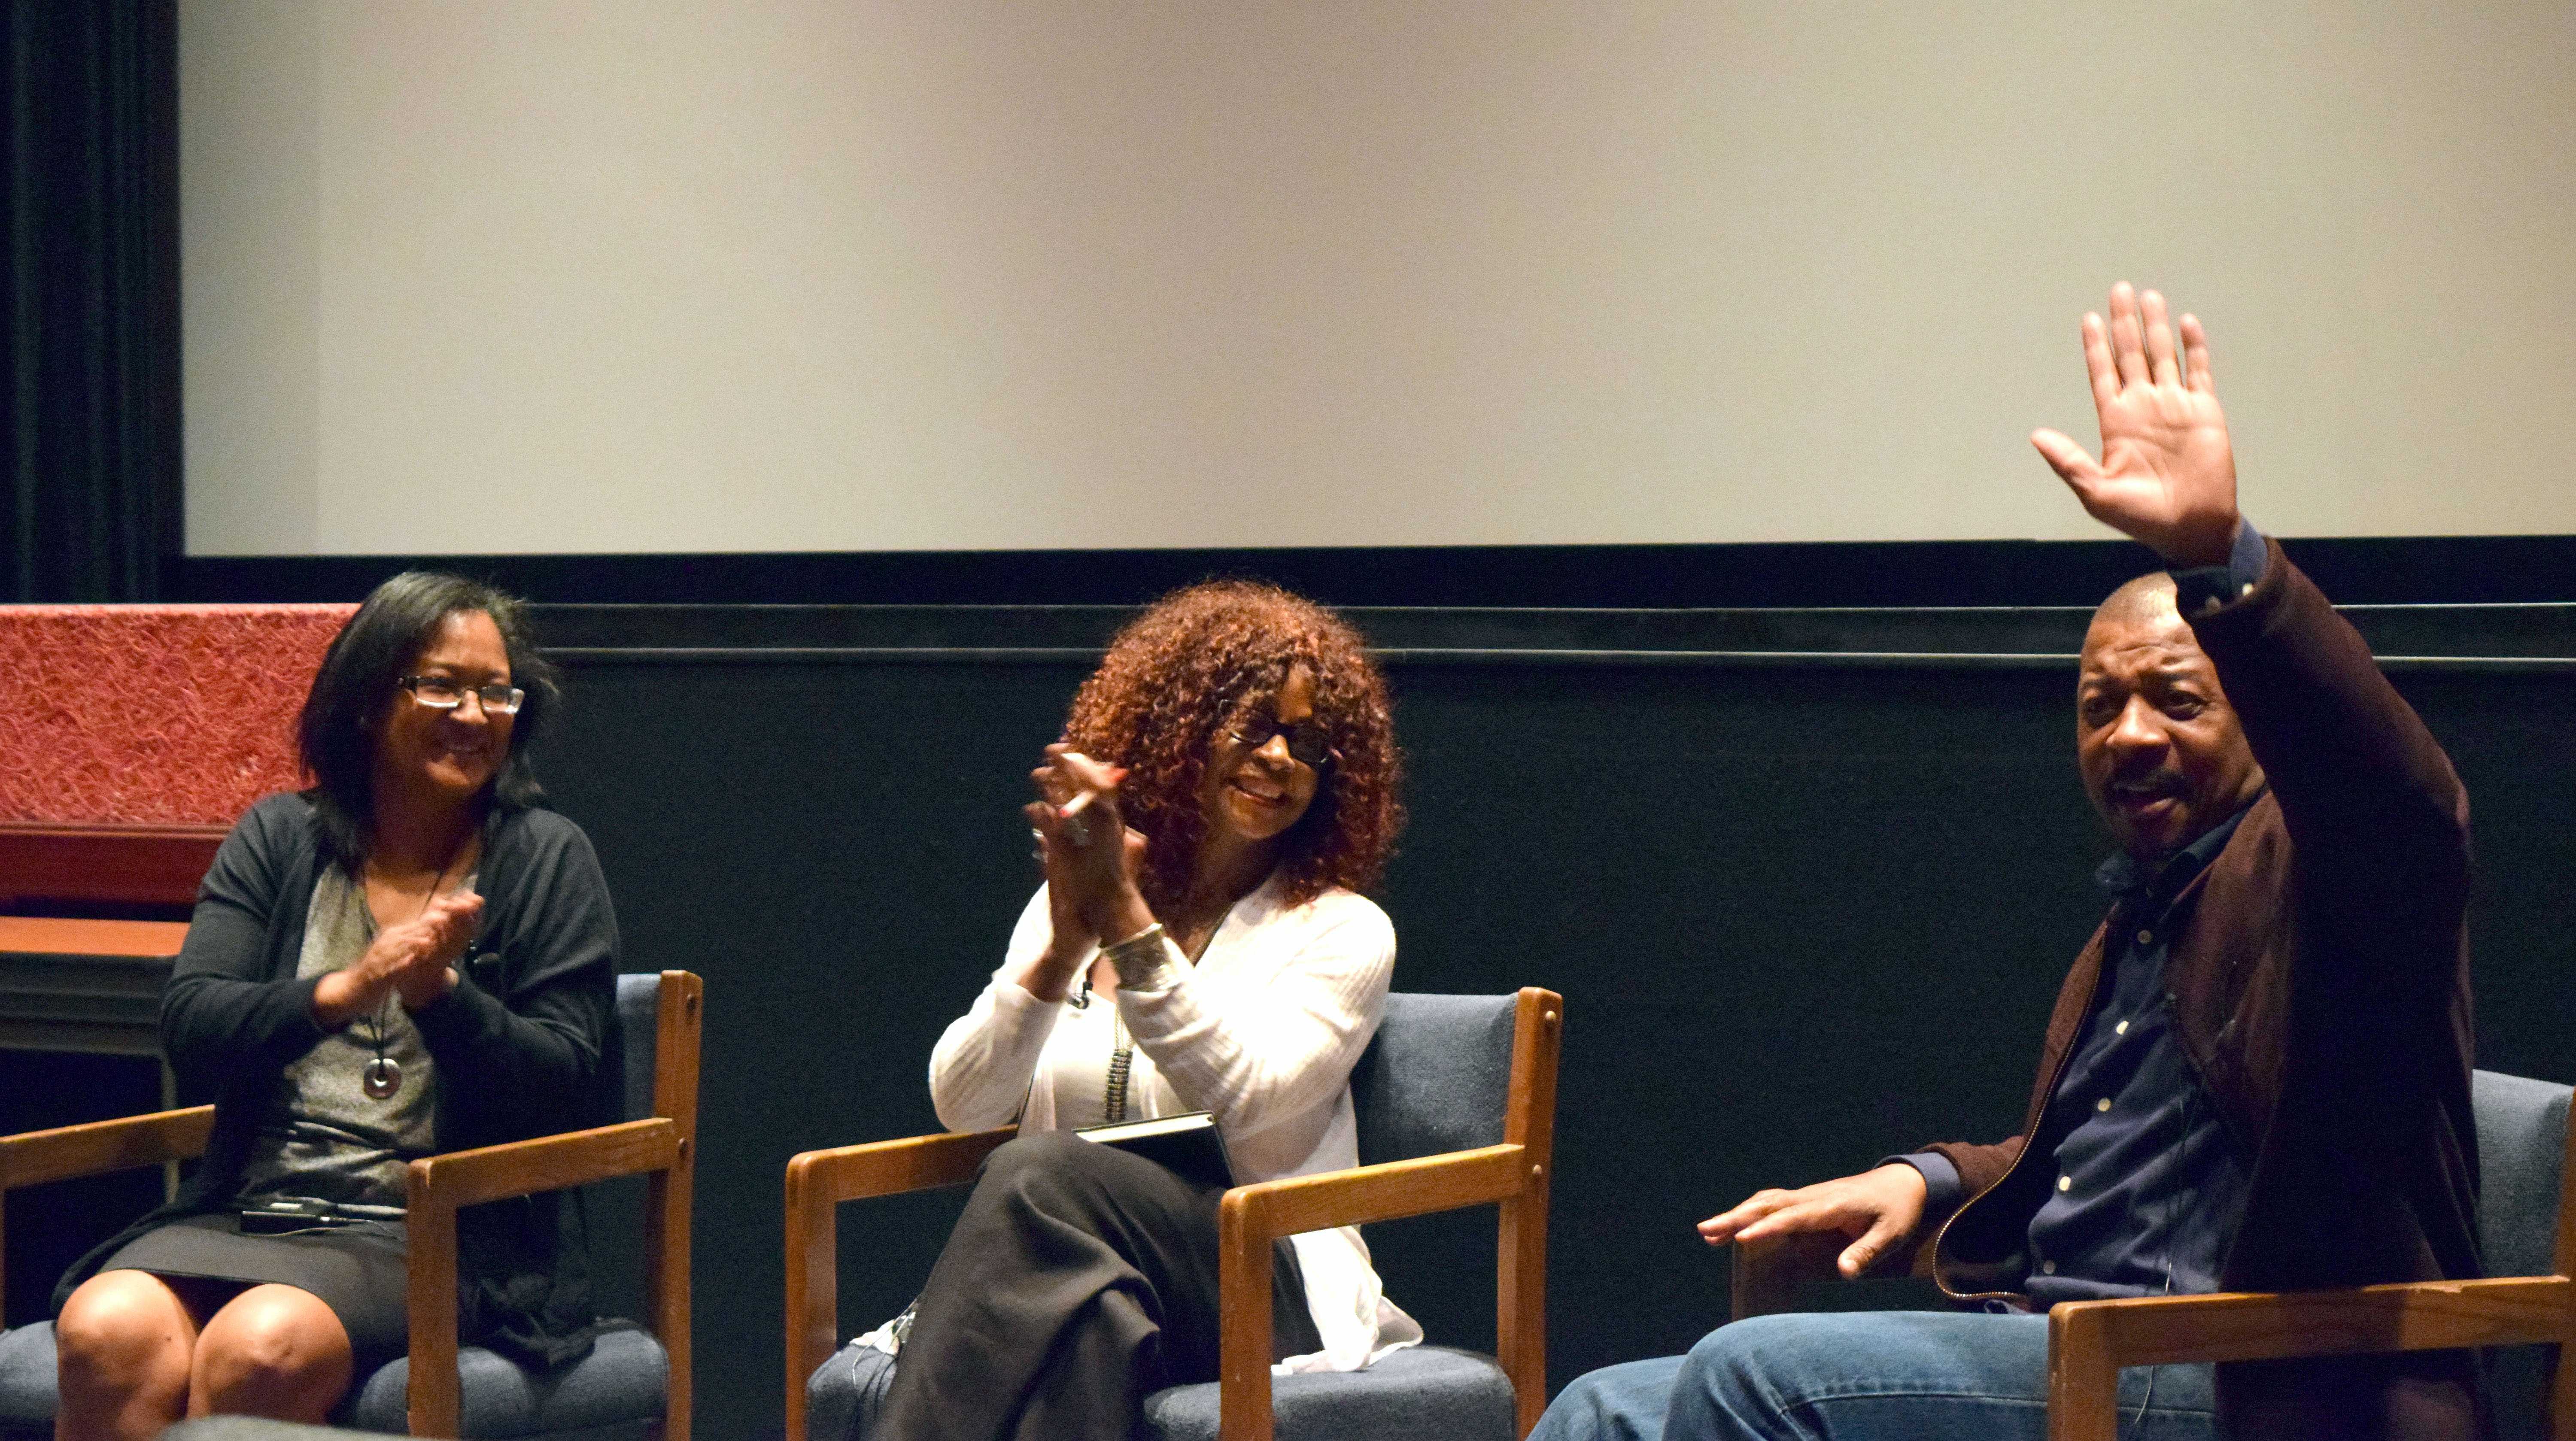 The moderators for the question and answer portion of the Hollywood Shuffle screening on Monday, Feb. 8. Frances Gateward, from left, CSUNs option head for media theory and criticism, Sylvia Macauley, department chair and professor of the Africana studies and Robert Townsend, producer, director, co-writer and actor in Hollywood Shuffle.